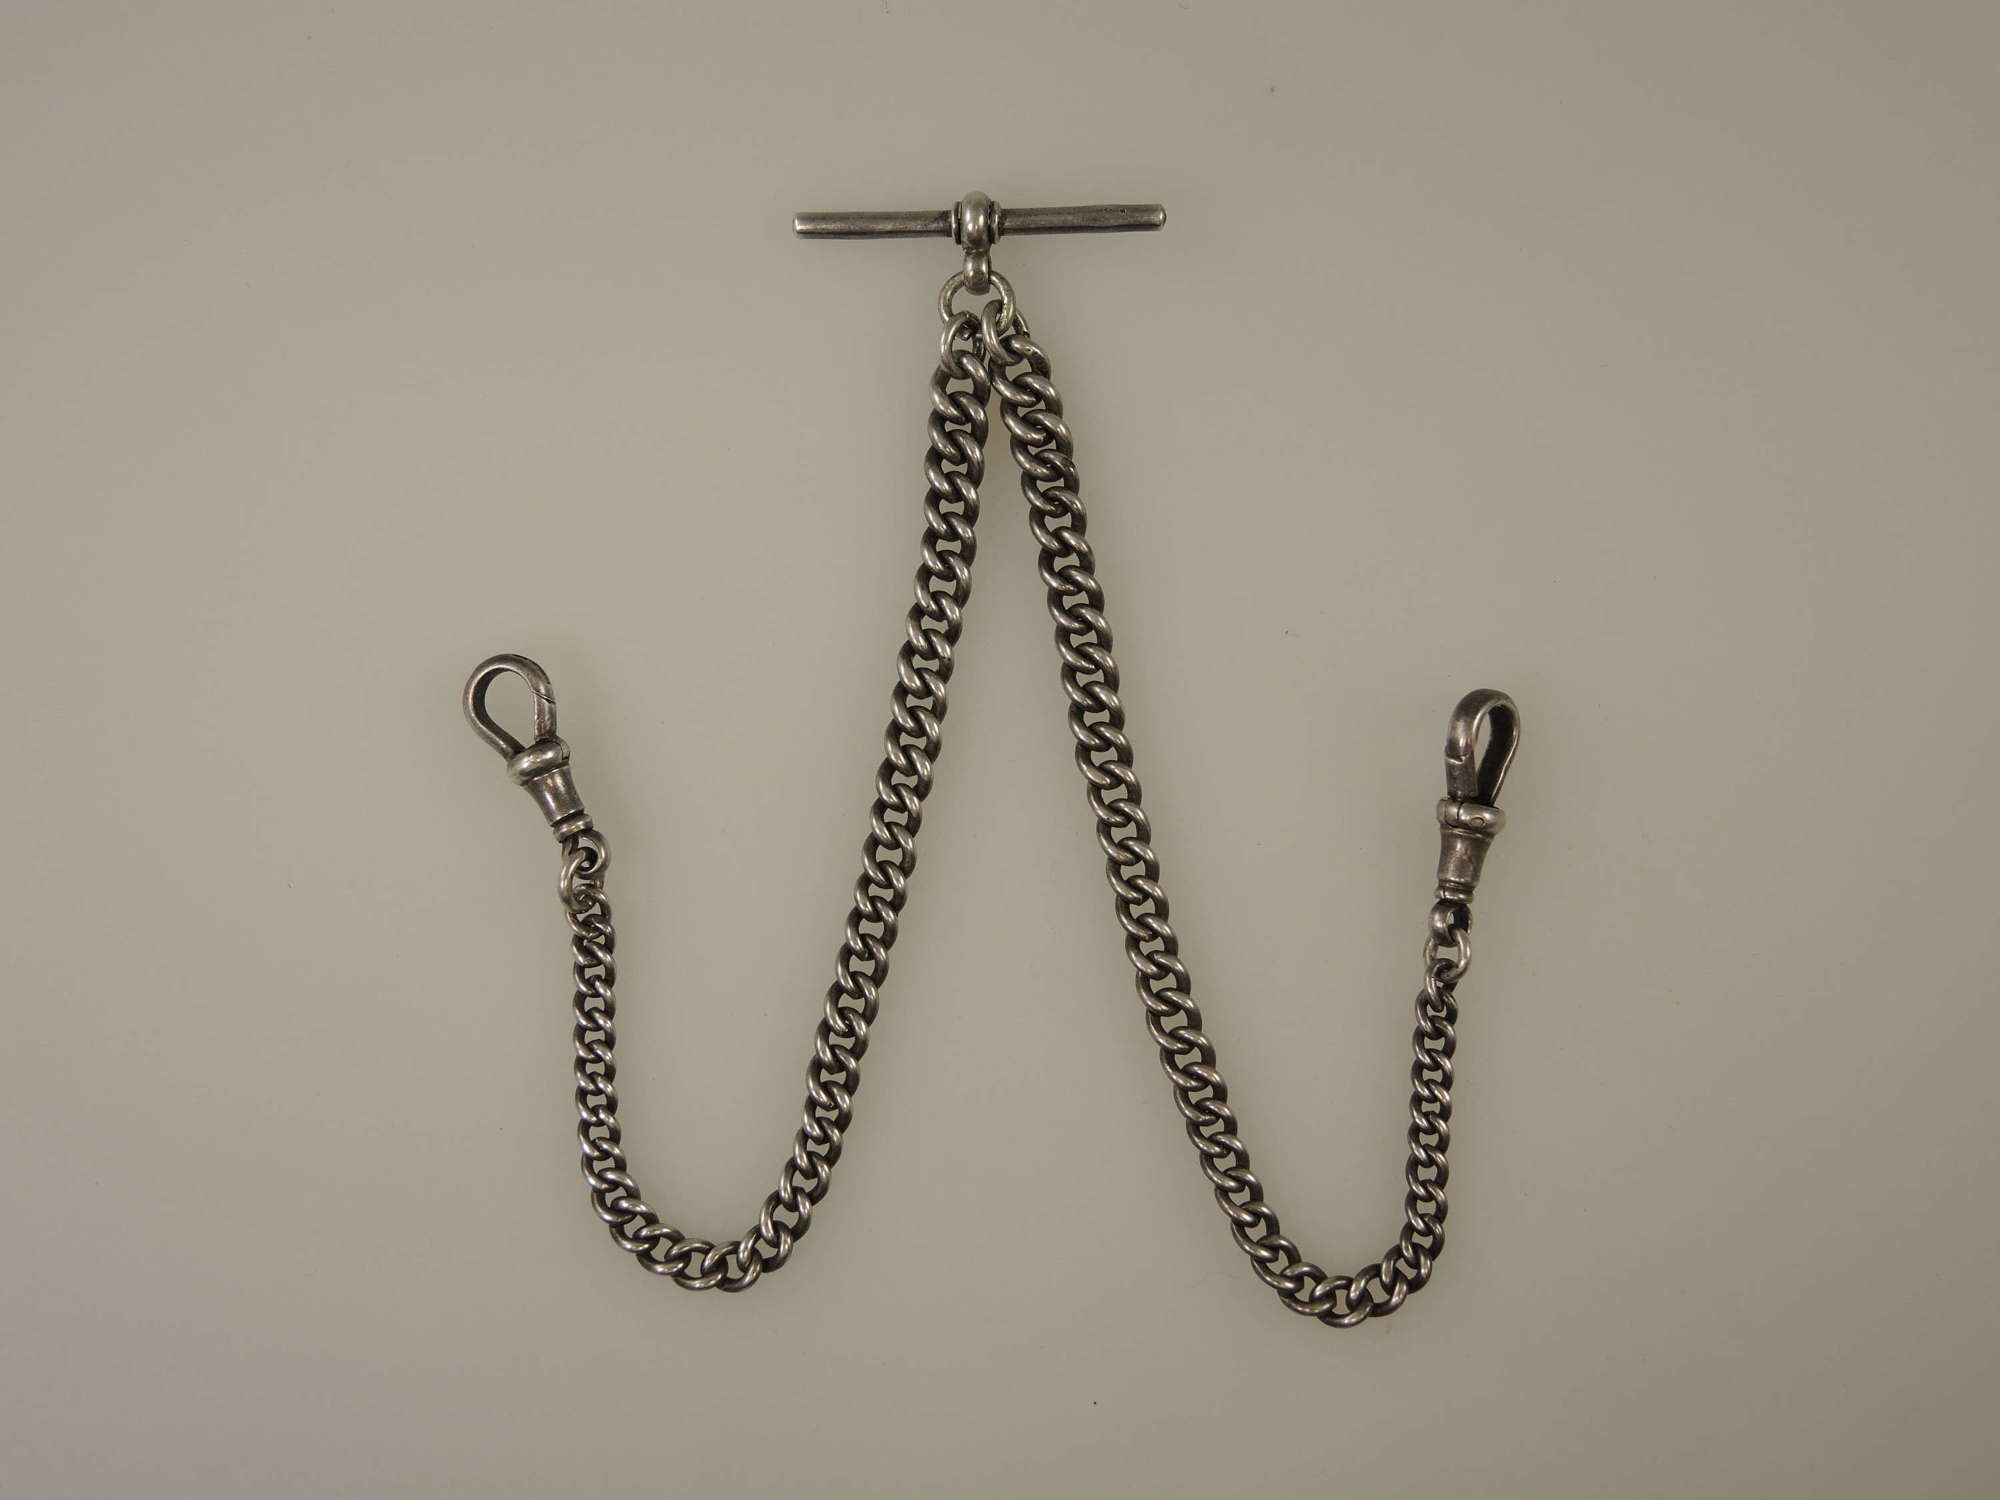 English silver double watch chain c1911